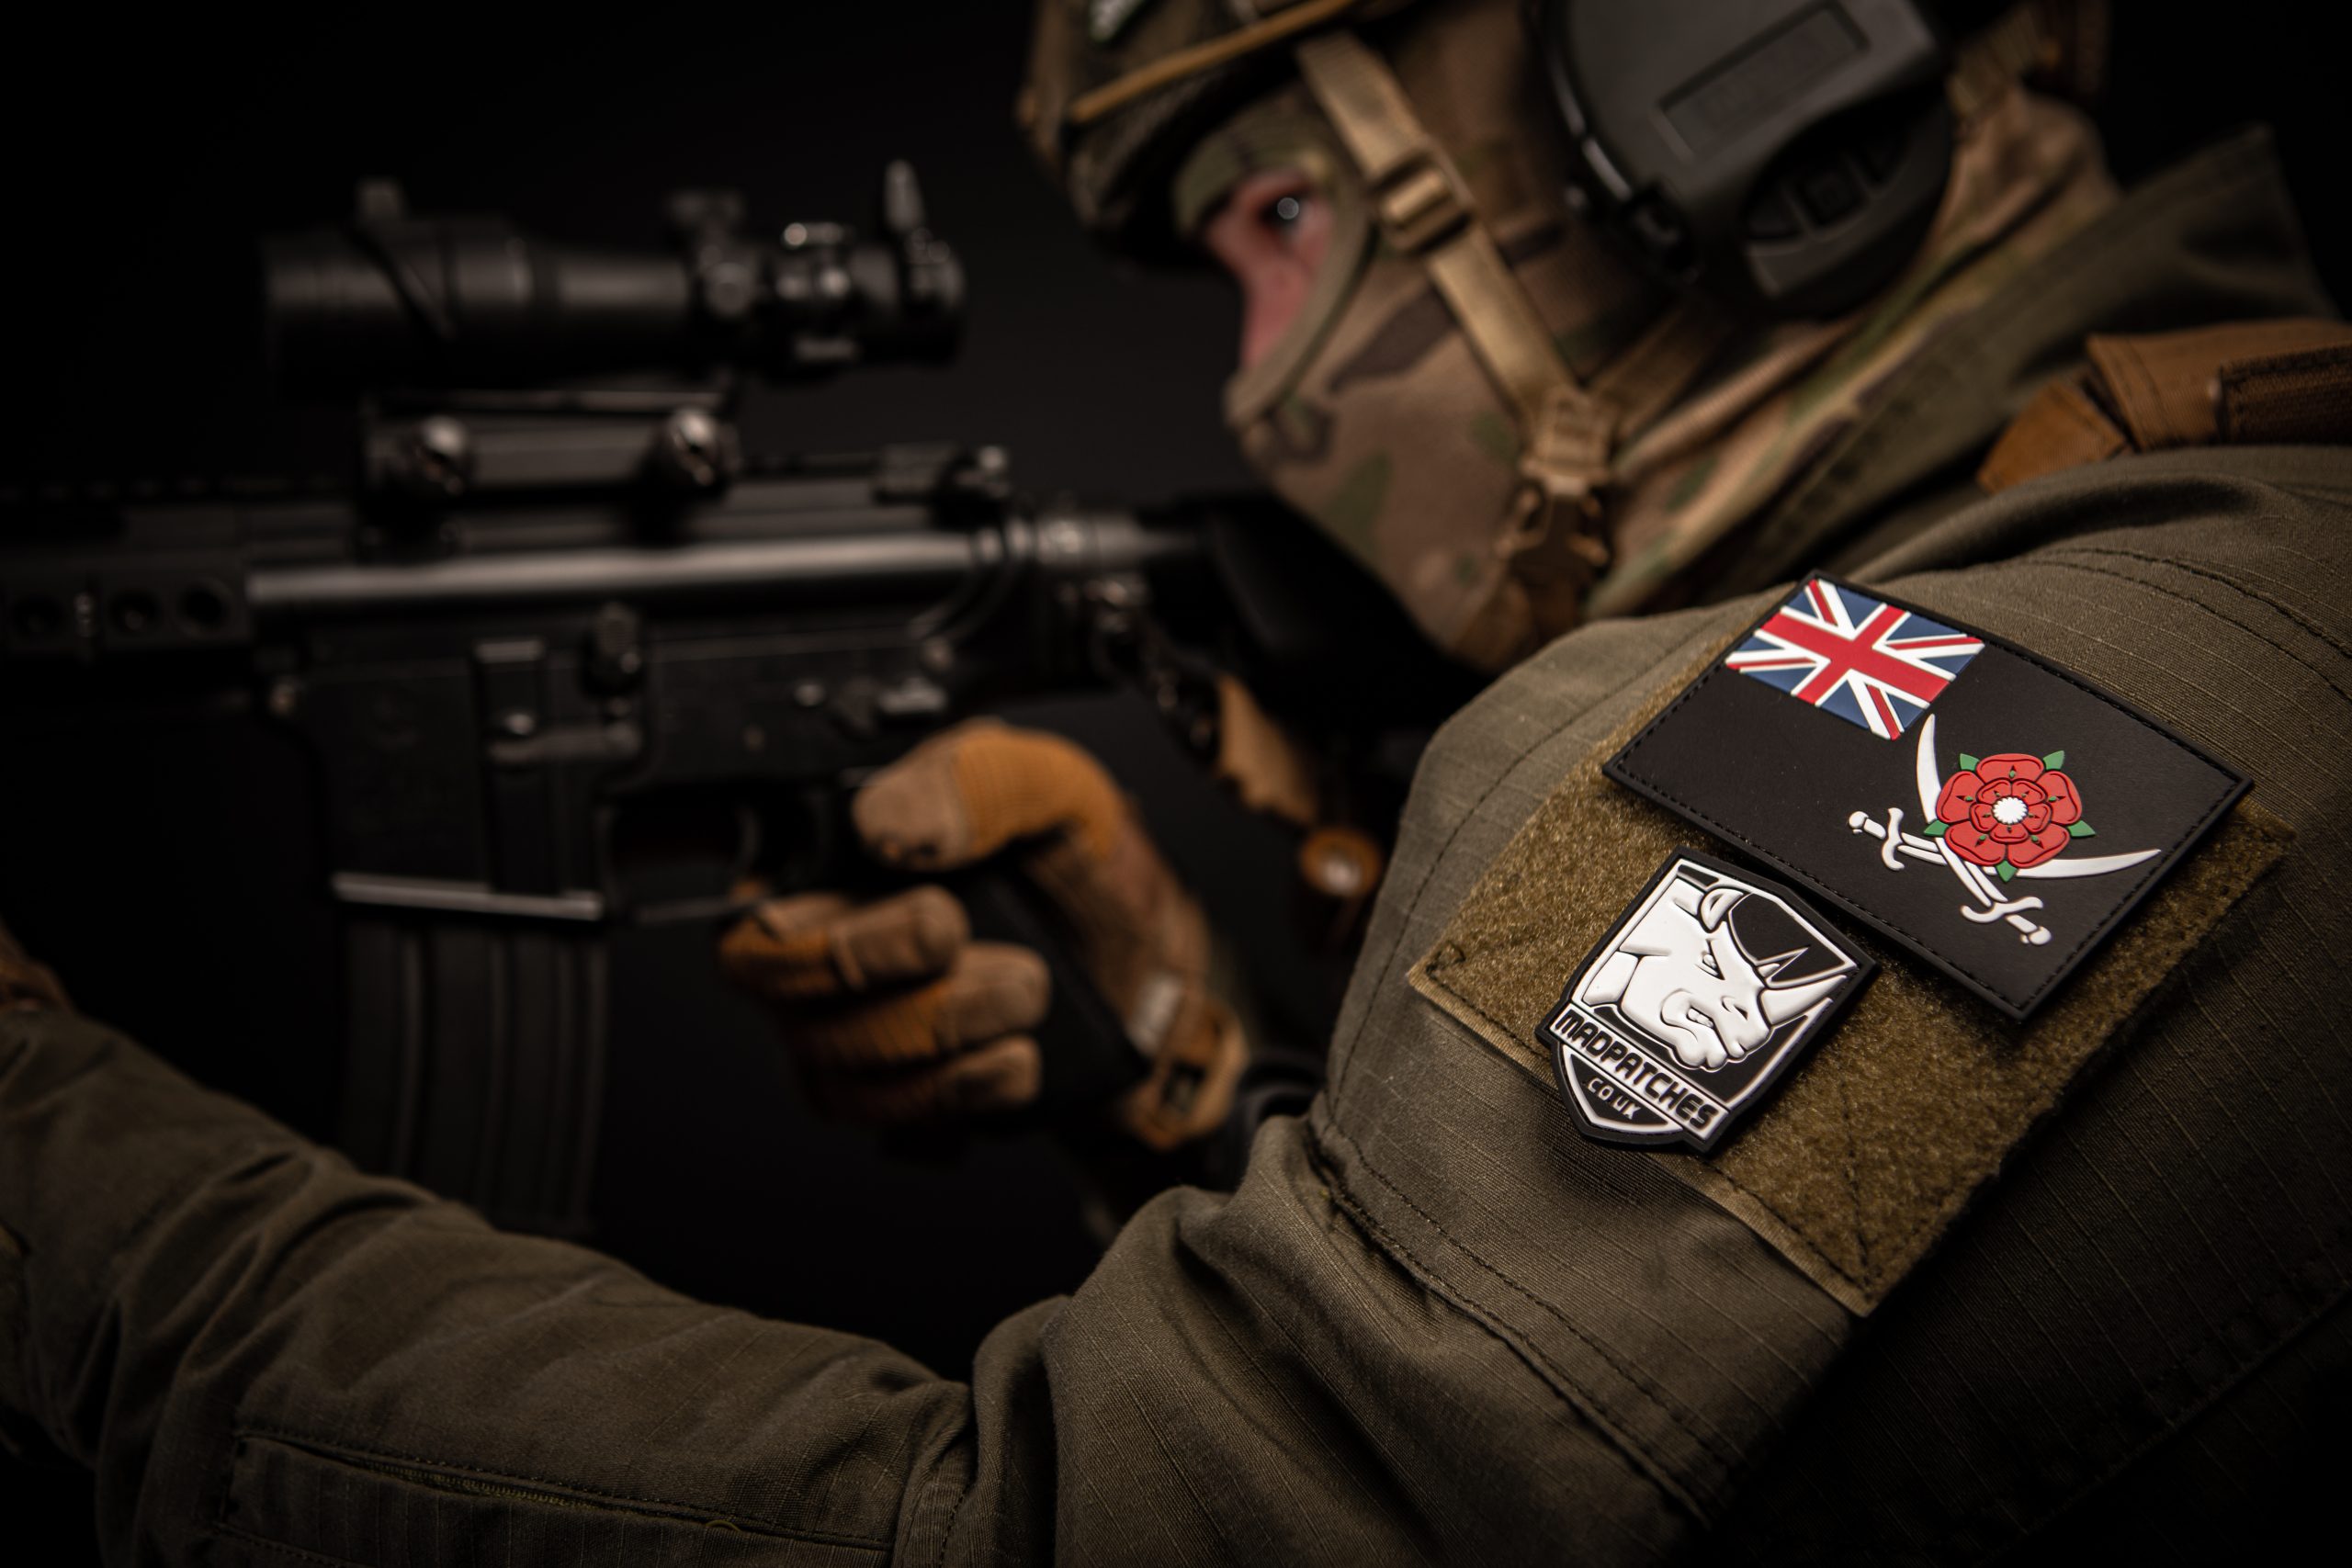 Custom Made 3D Rubber PVC Patches for Airsoft